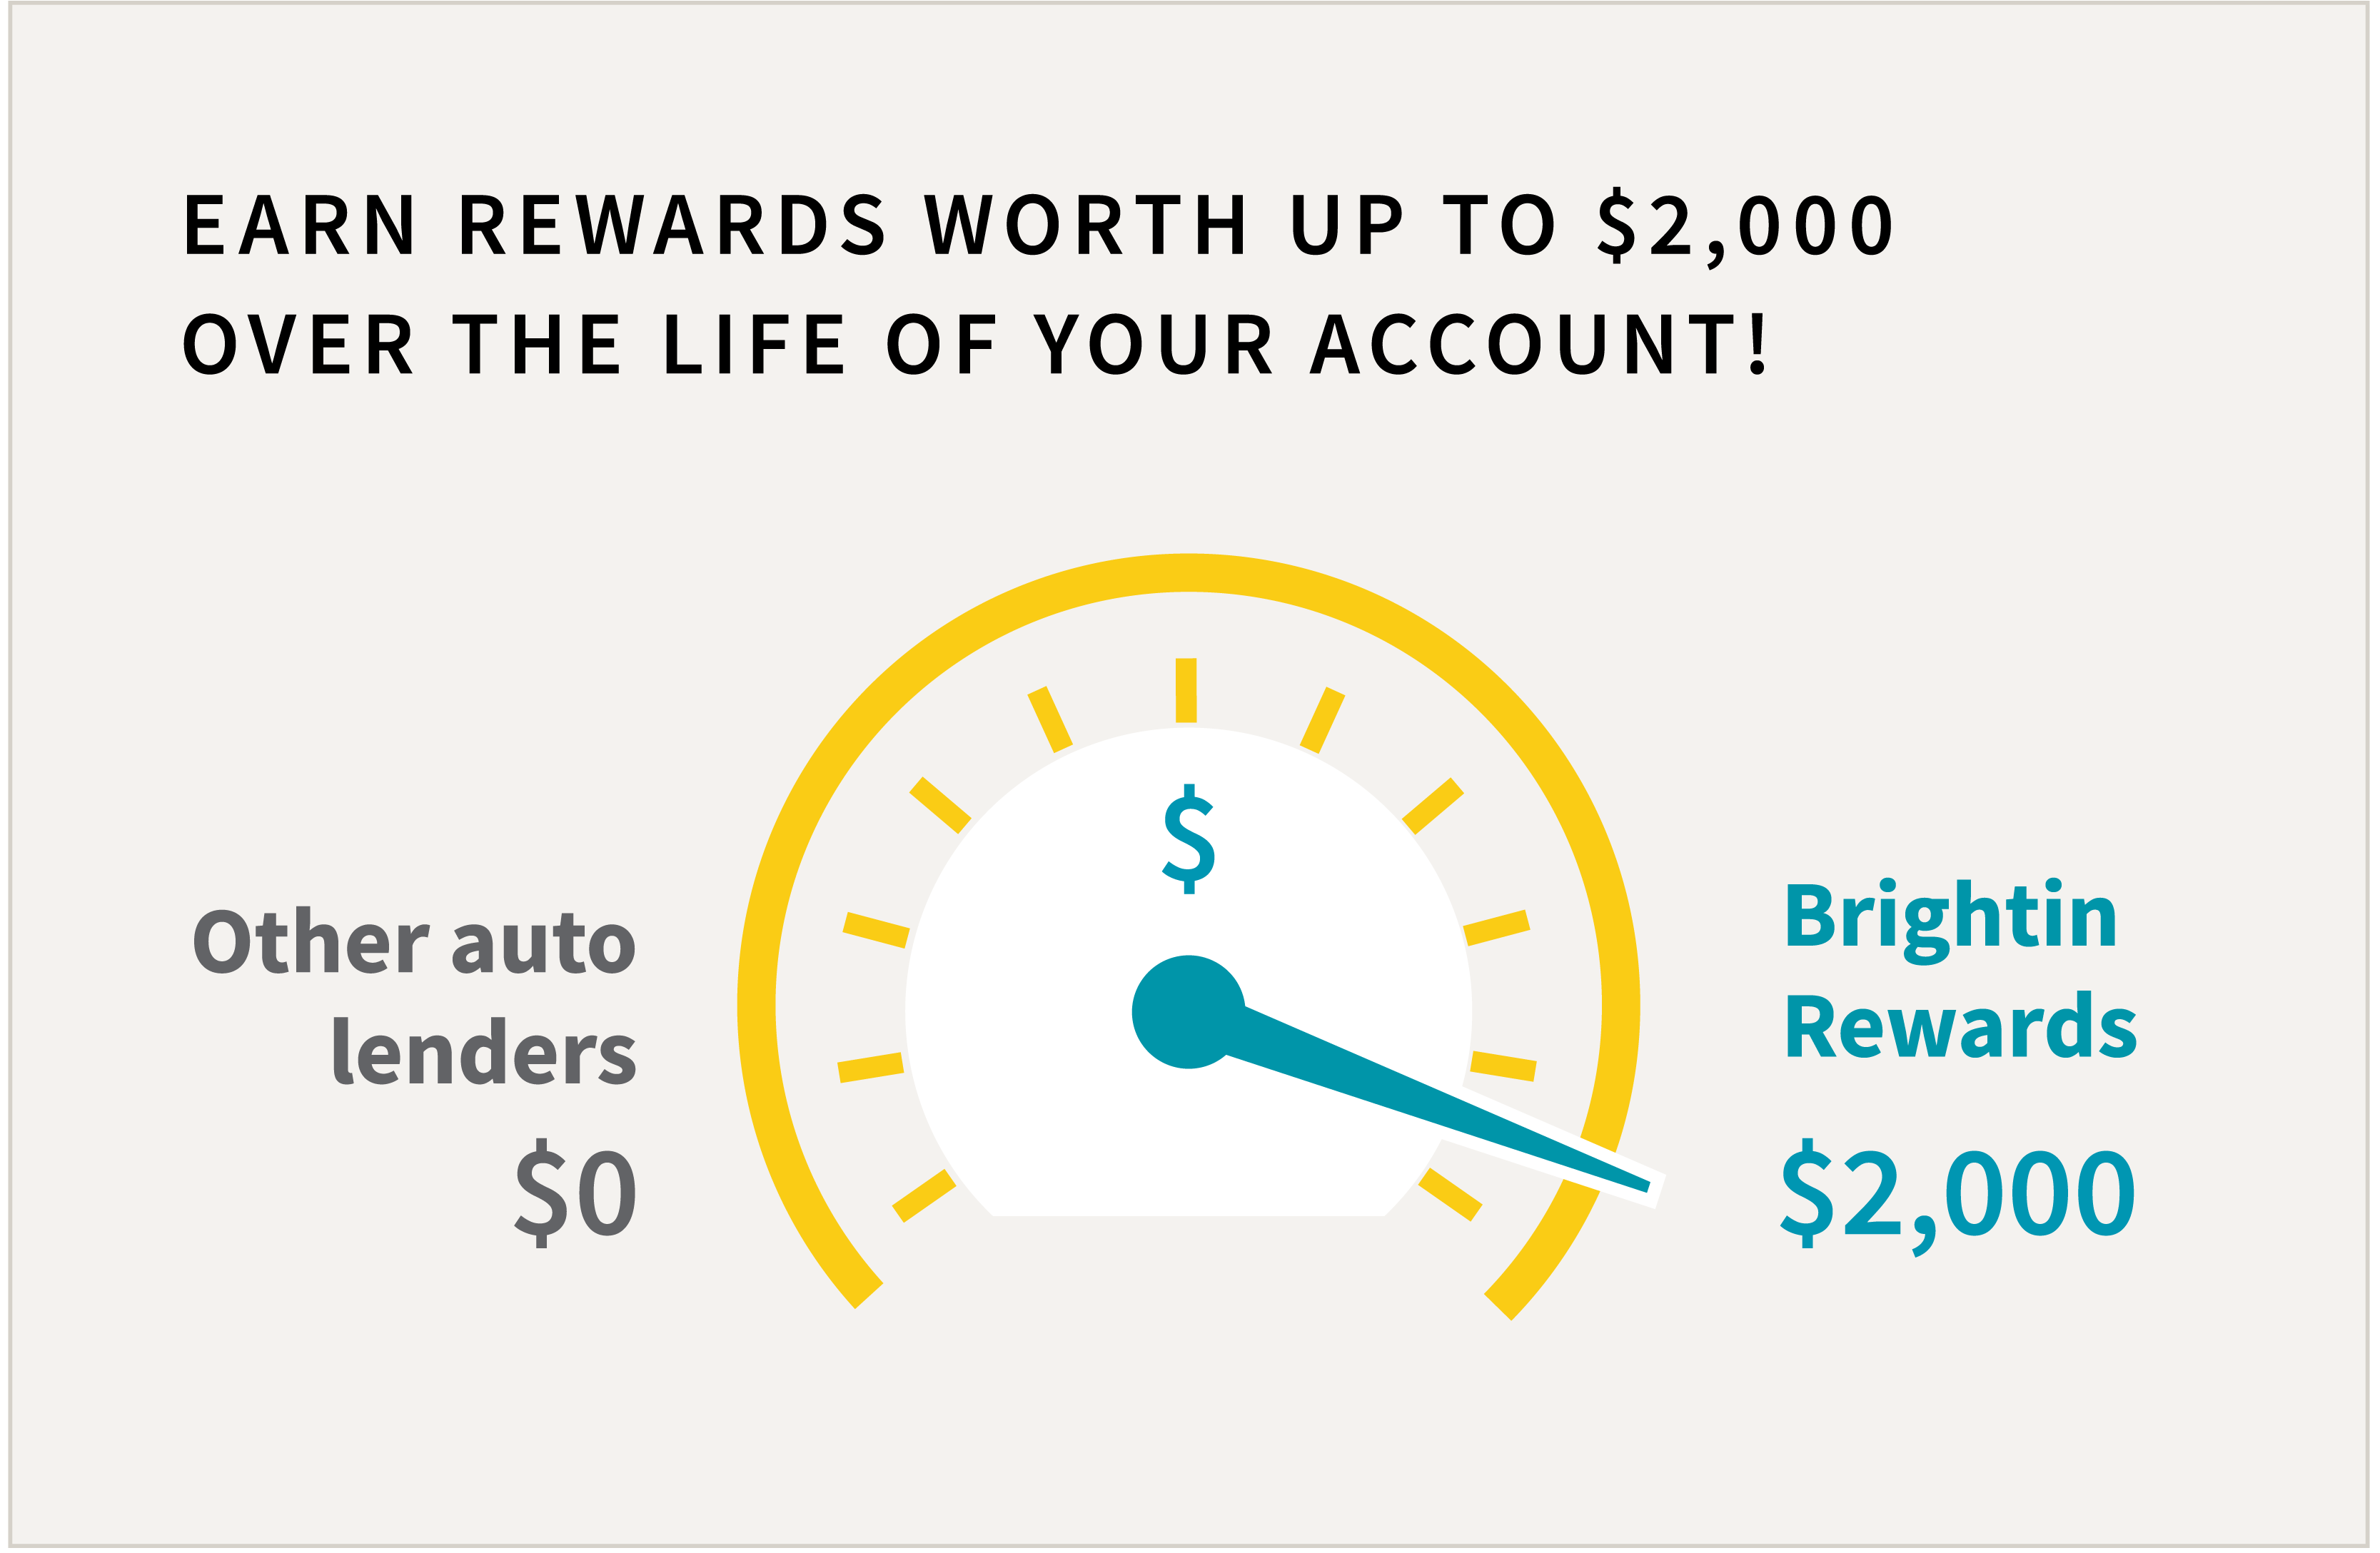 An illustration of a car dial with a headline that says "Earn rewards worth up to $2,000 over the life of your account.